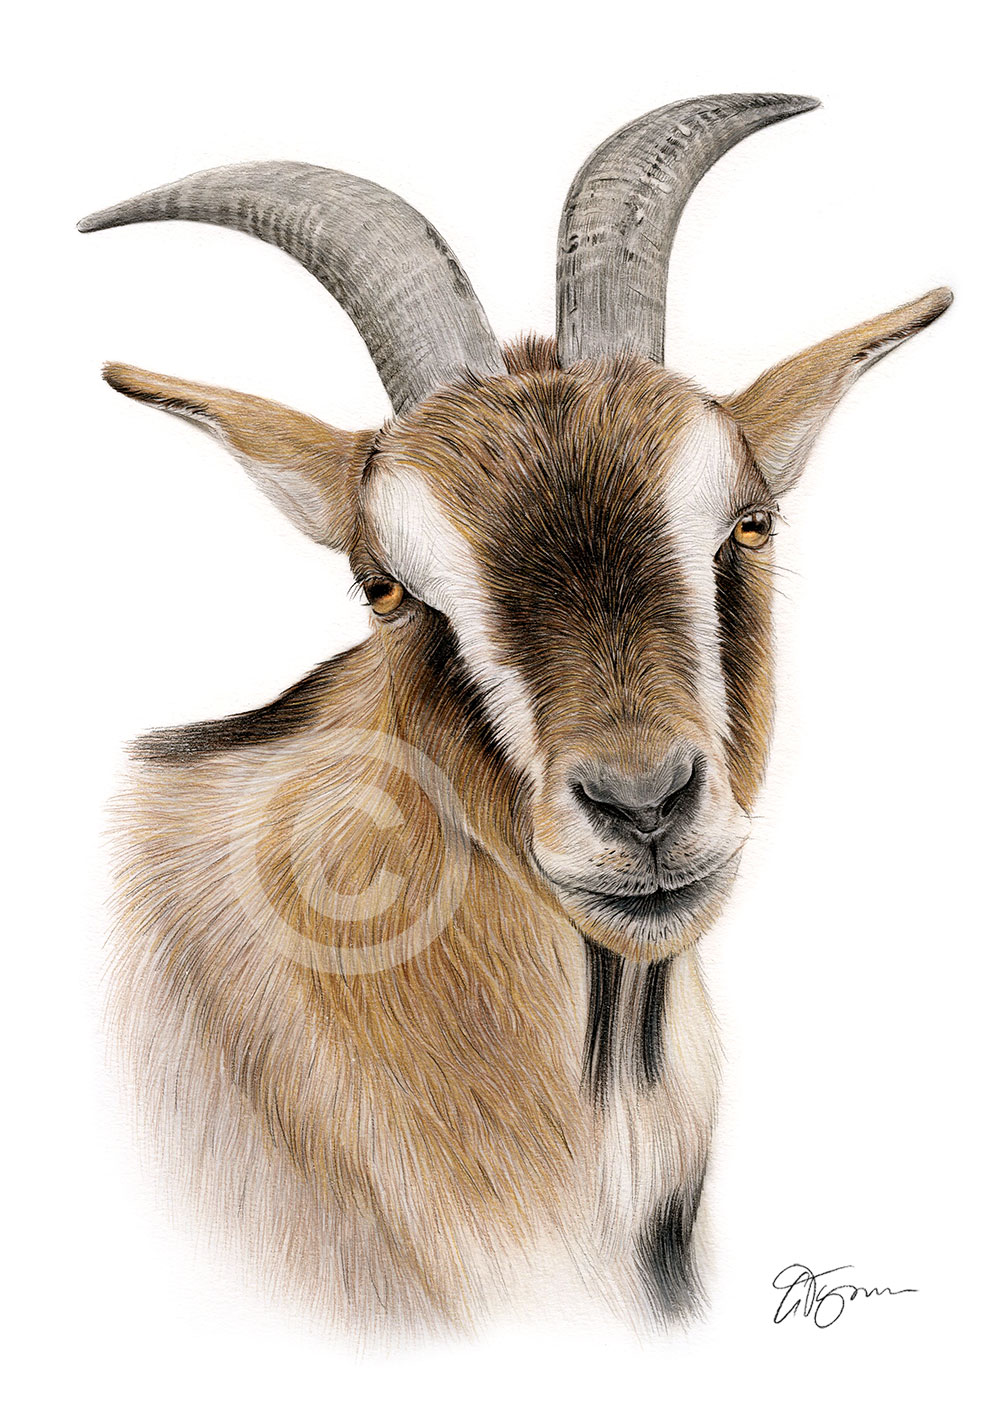 Colour pencil drawing of a goat by UK artist Gary Tymon